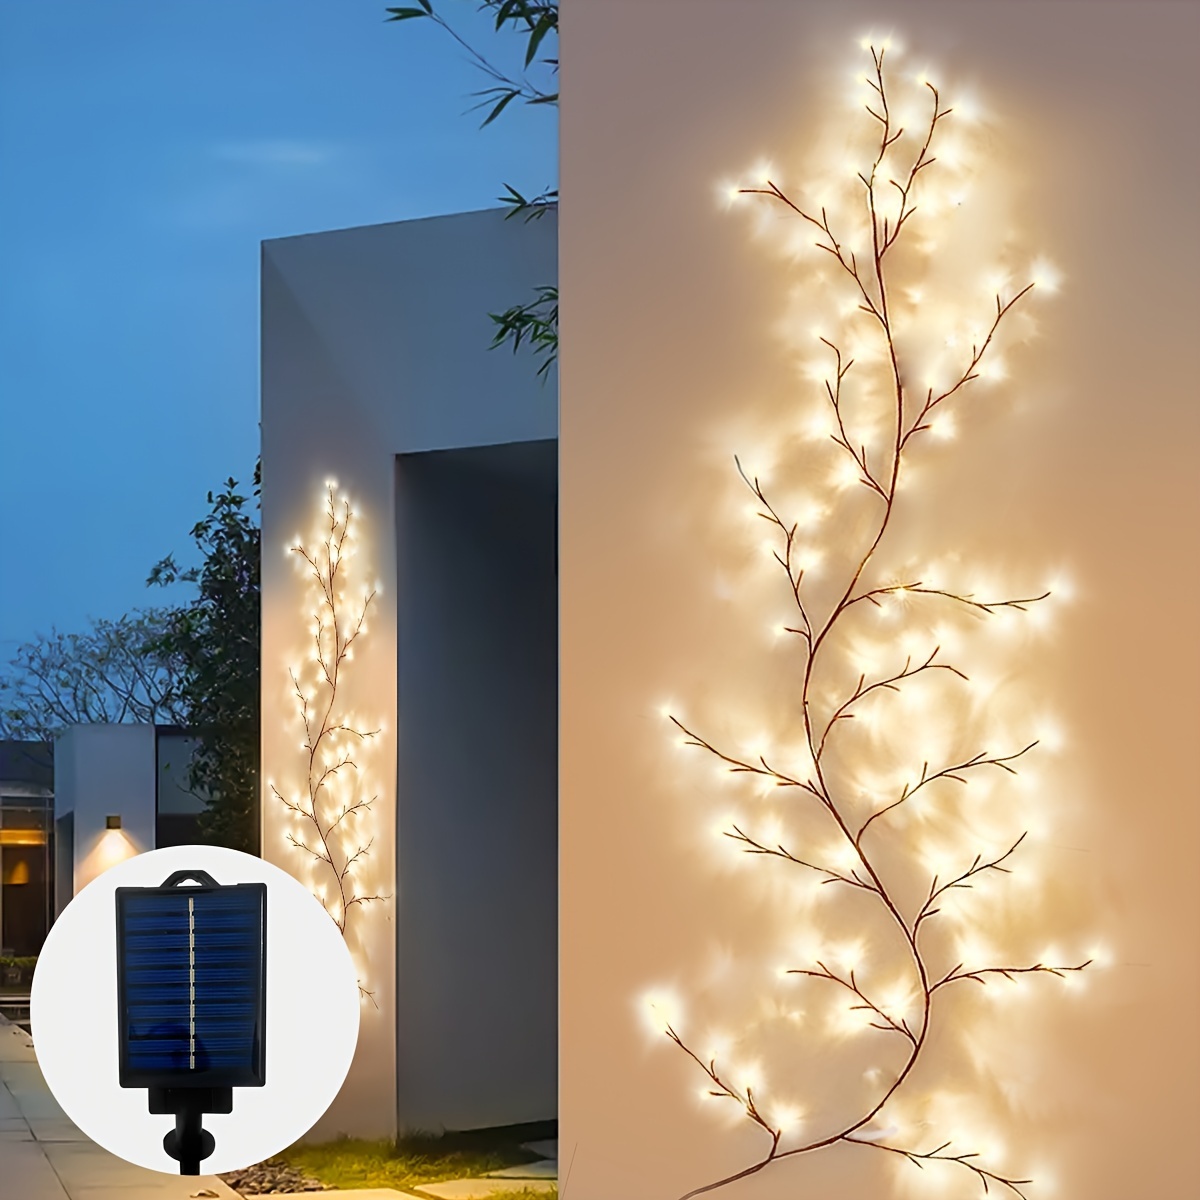 

1pc Extra Long Solar String Lights Outdoor, 180cm/71in 96 Led Waterproof Solar Fairy Lights, With 8 Modes, Solar Twinkle Lights For Tree Garden Party Wedding Decoration (warm White)